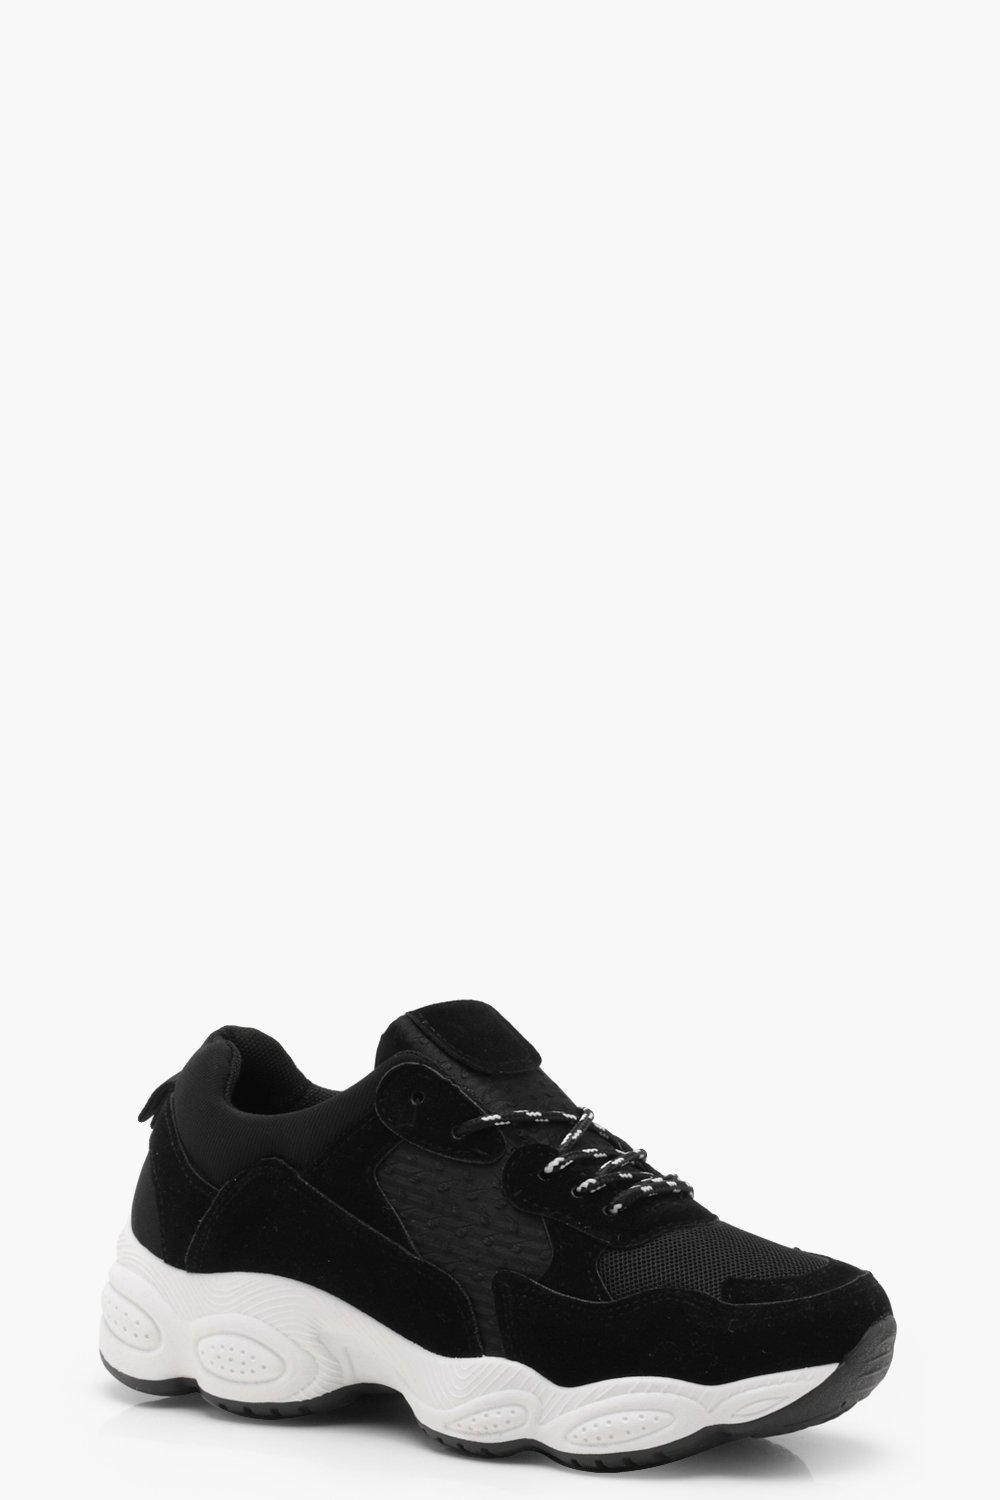 black trainers with white sole womens